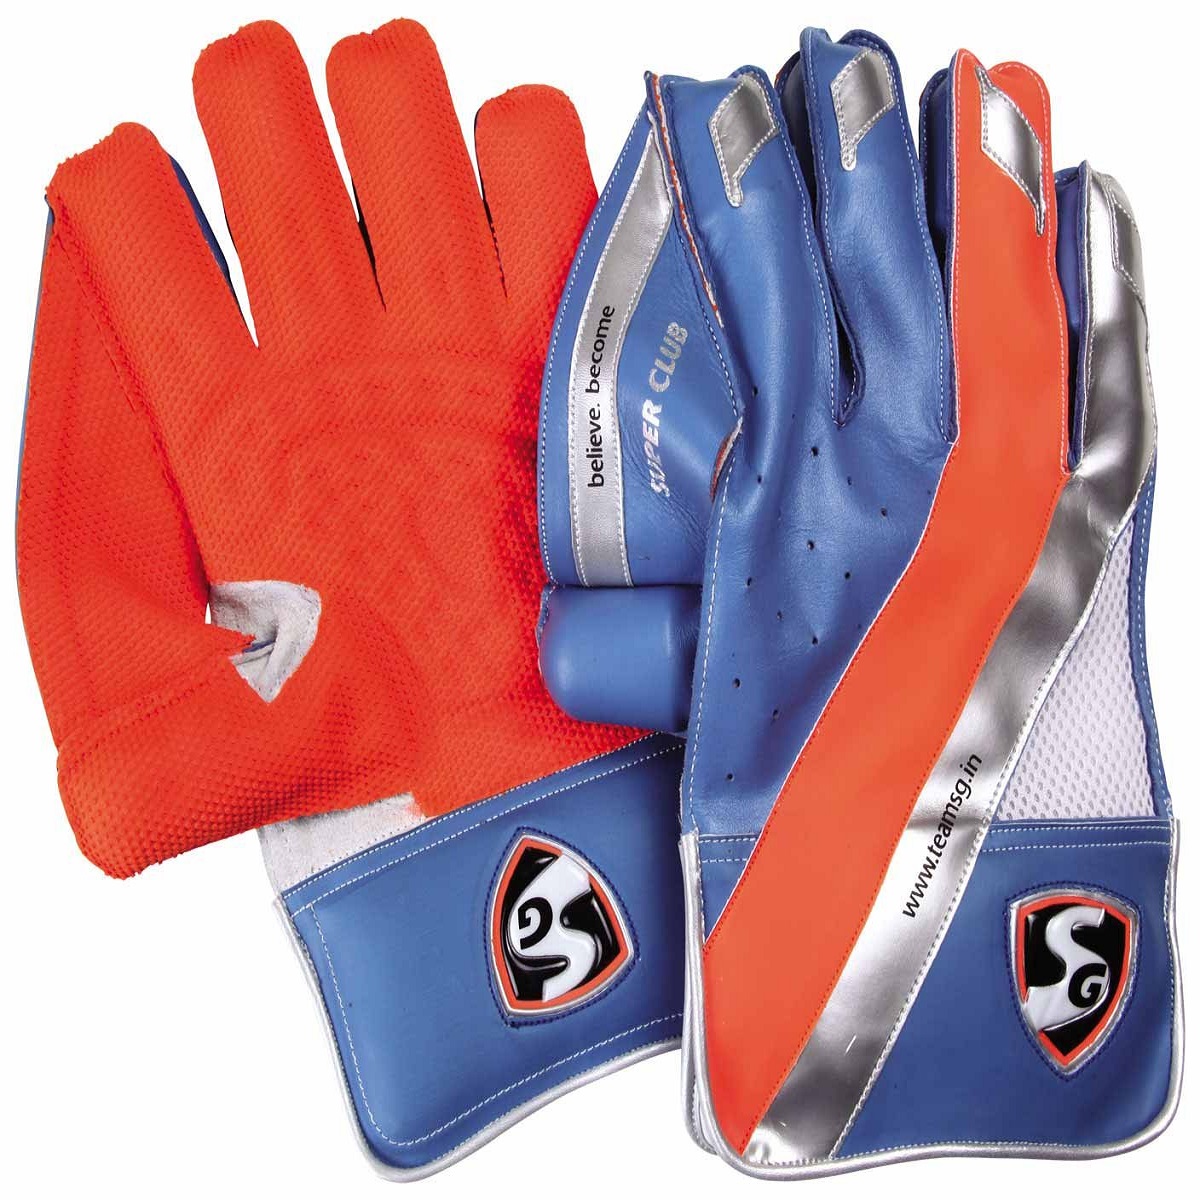 SG WICKET KEEPING GLOVES